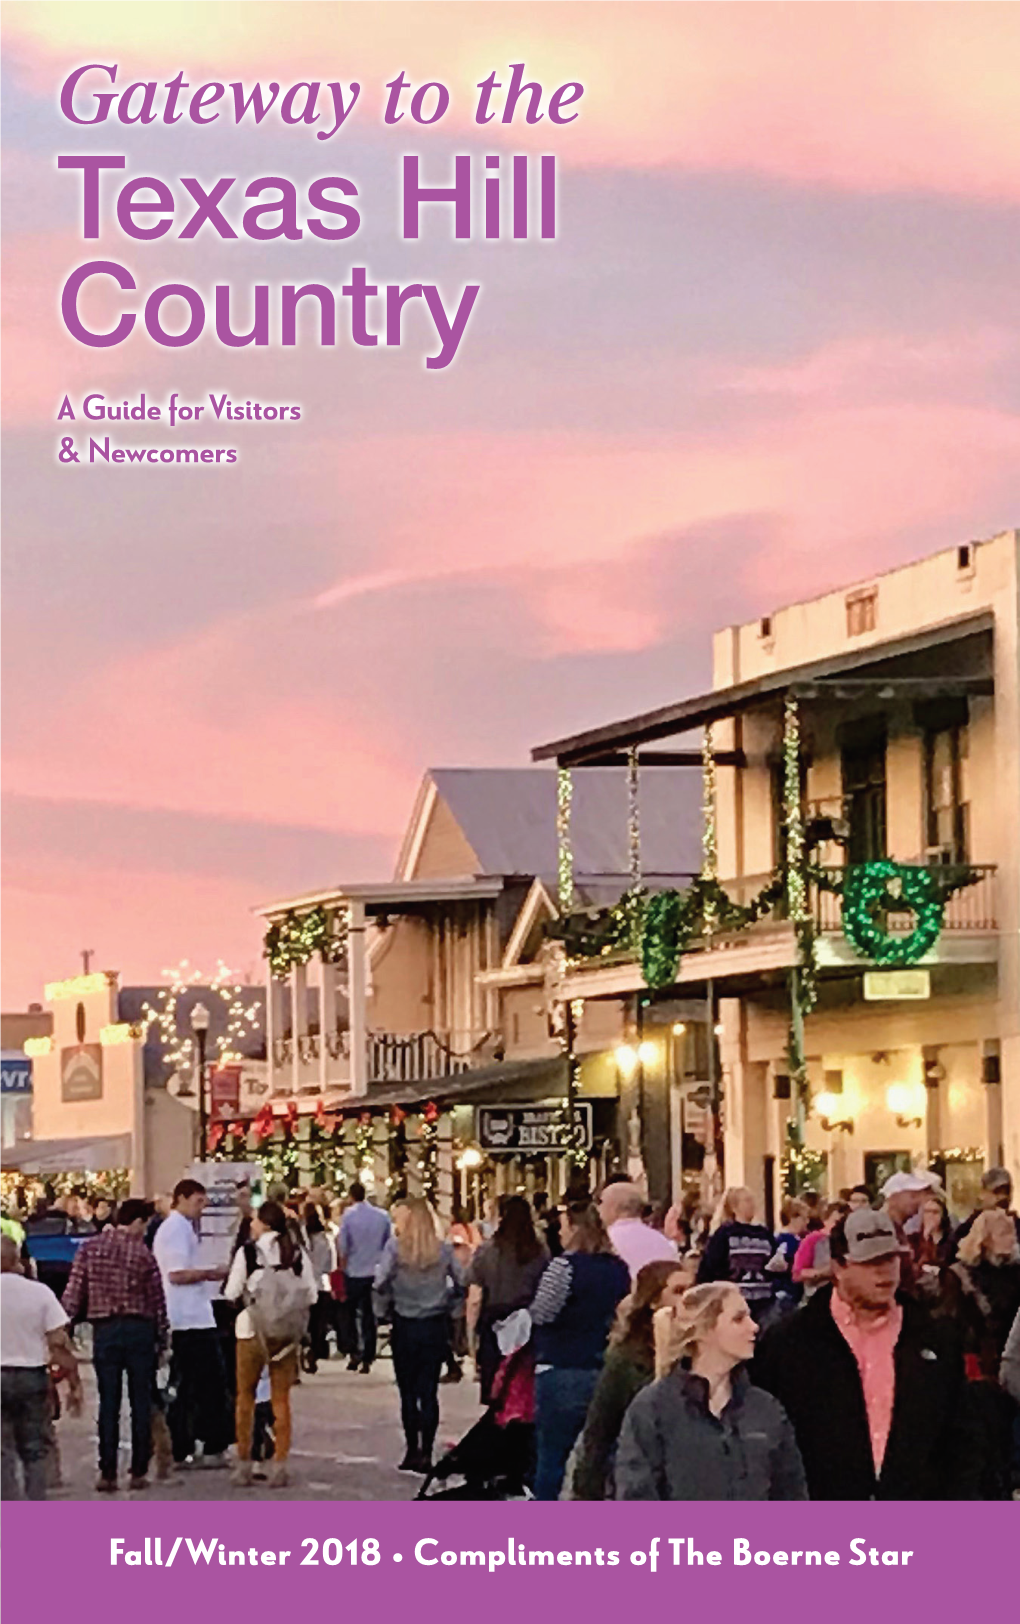 Texas Hill Country a Guide for Visitors & Newcomers